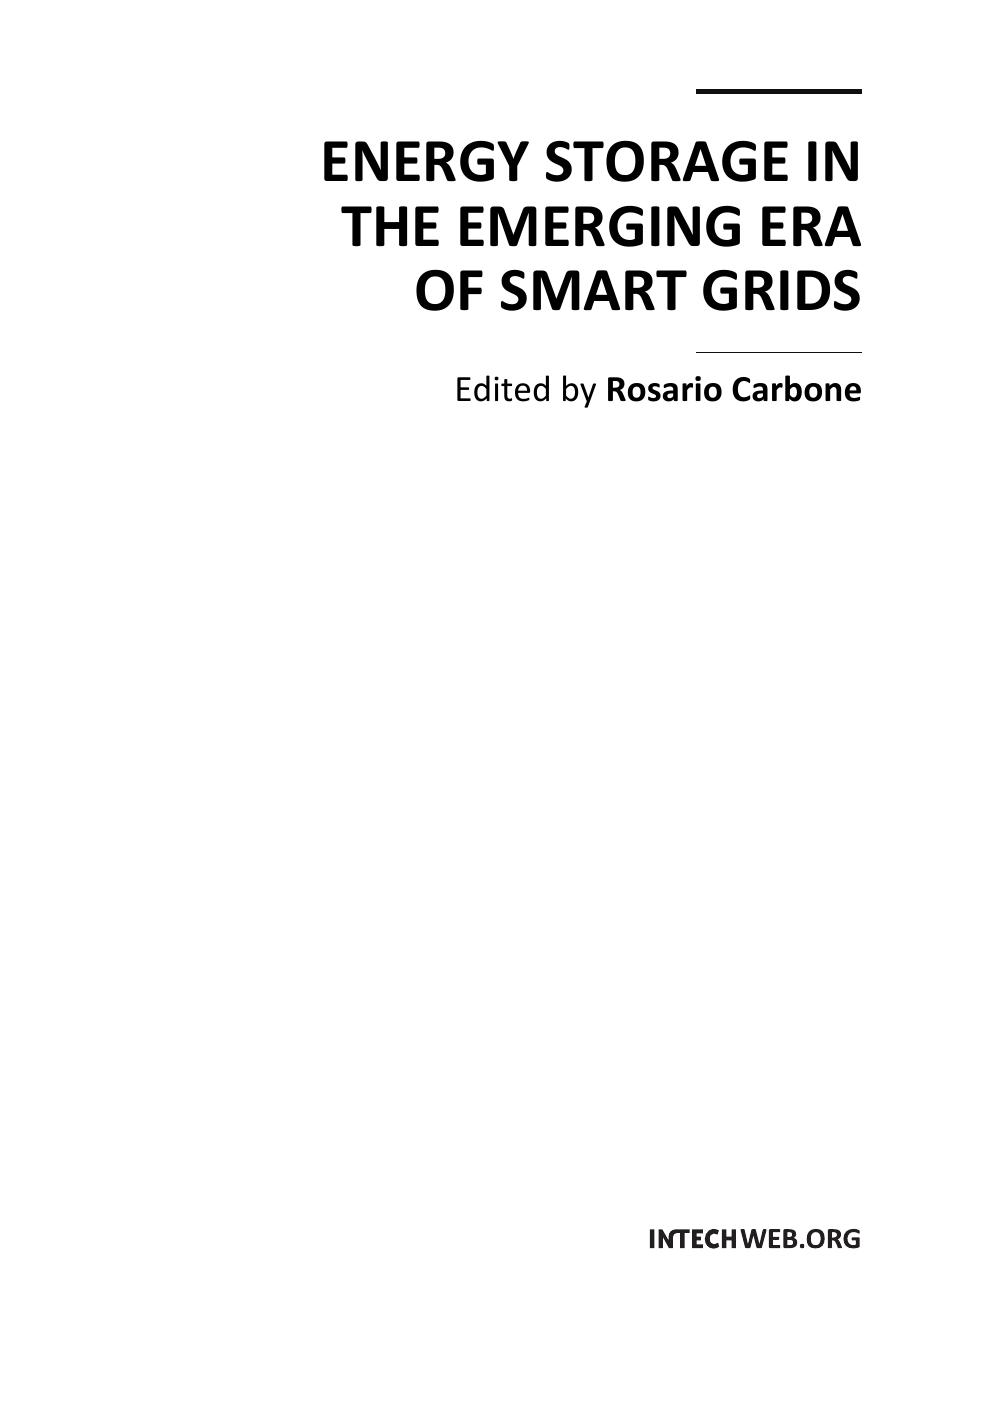 Microsoft Word - preface_ Energy Storage in the Emerging Era of Smart Grids